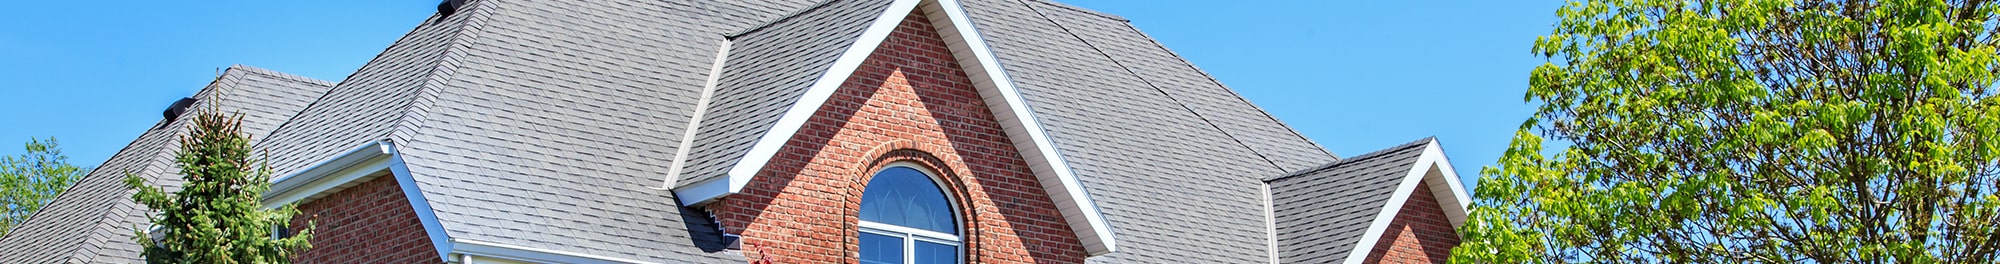 Roof Replacement Cost in Muskego & New Berlin